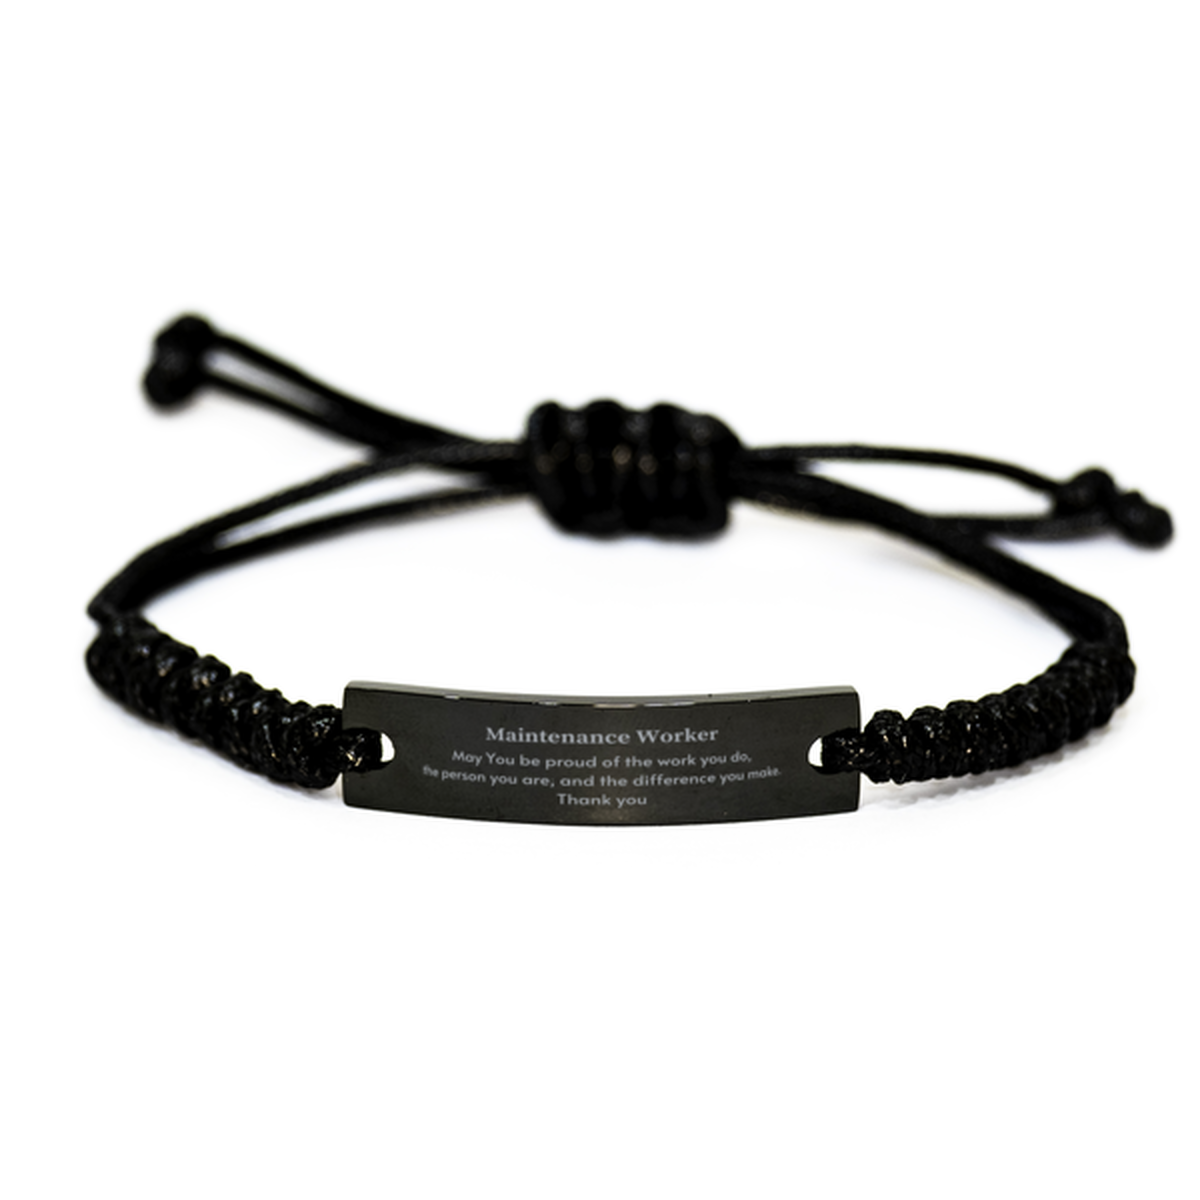 Heartwarming Black Rope Bracelet Retirement Coworkers Gifts for Maintenance Worker, Maintenance Worker May You be proud of the work you do, the person you are Gifts for Boss Men Women Friends